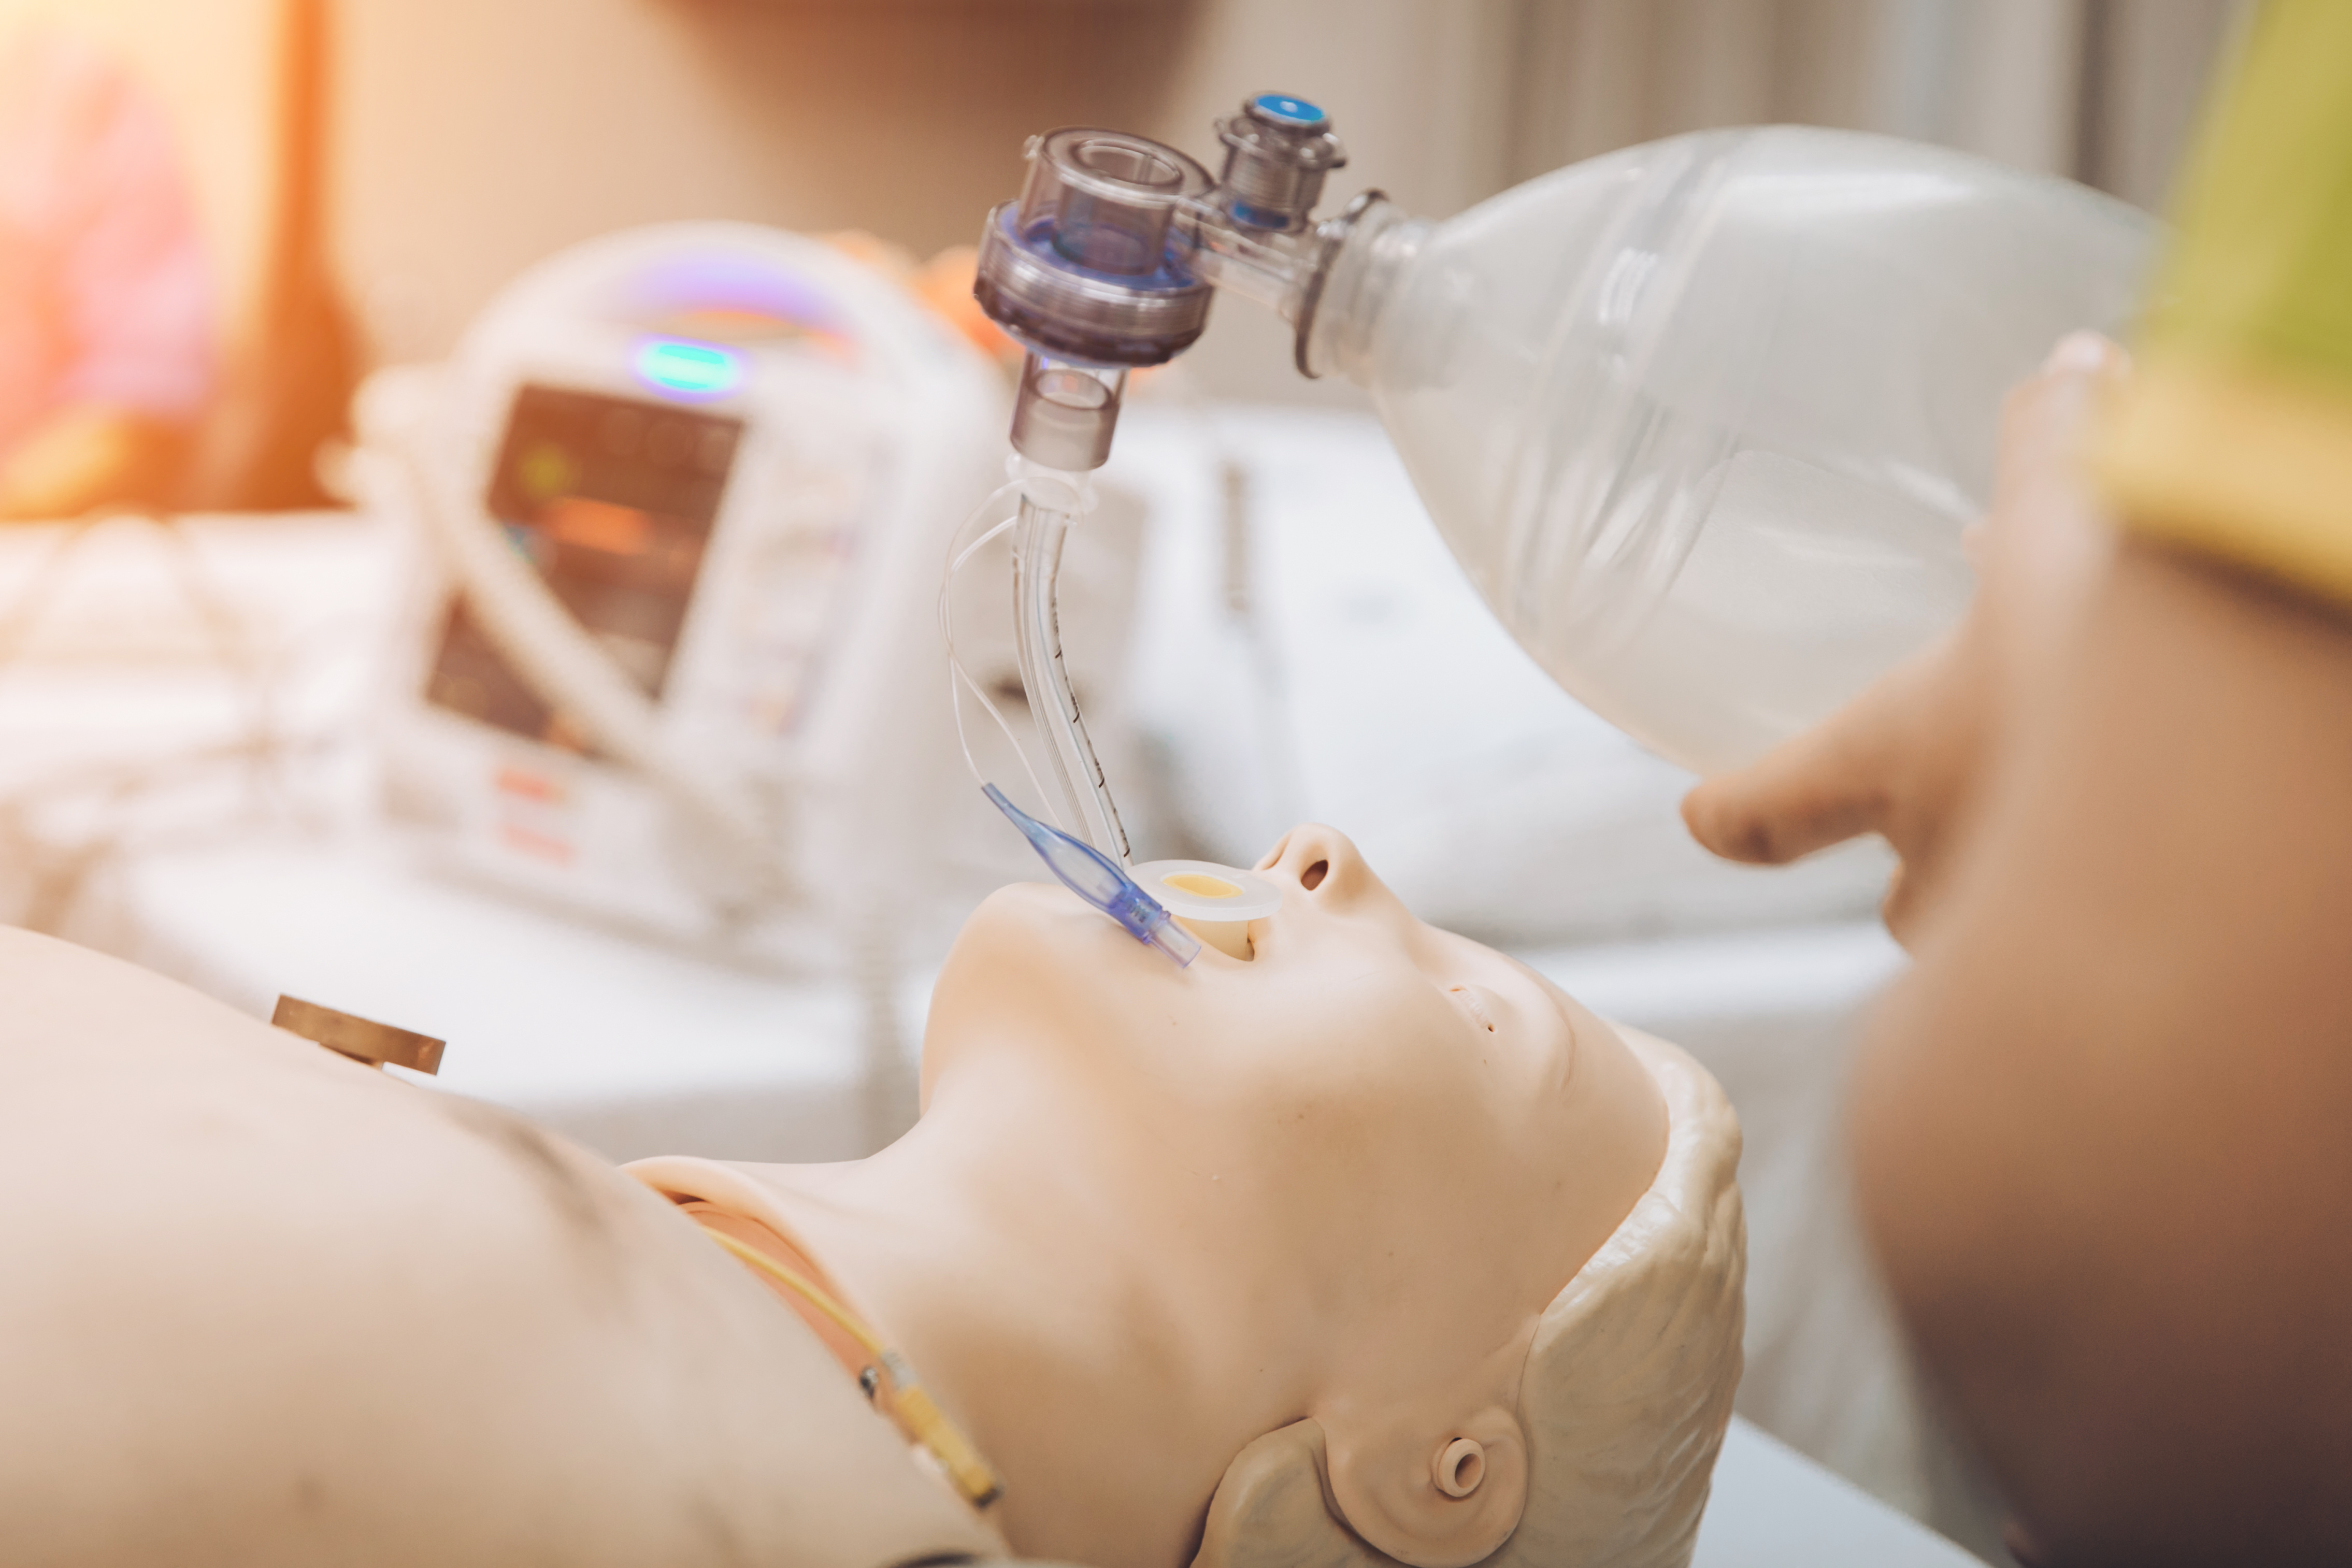 A person using a bag-valve-mask medical device on a dummy patient to practice intubation.